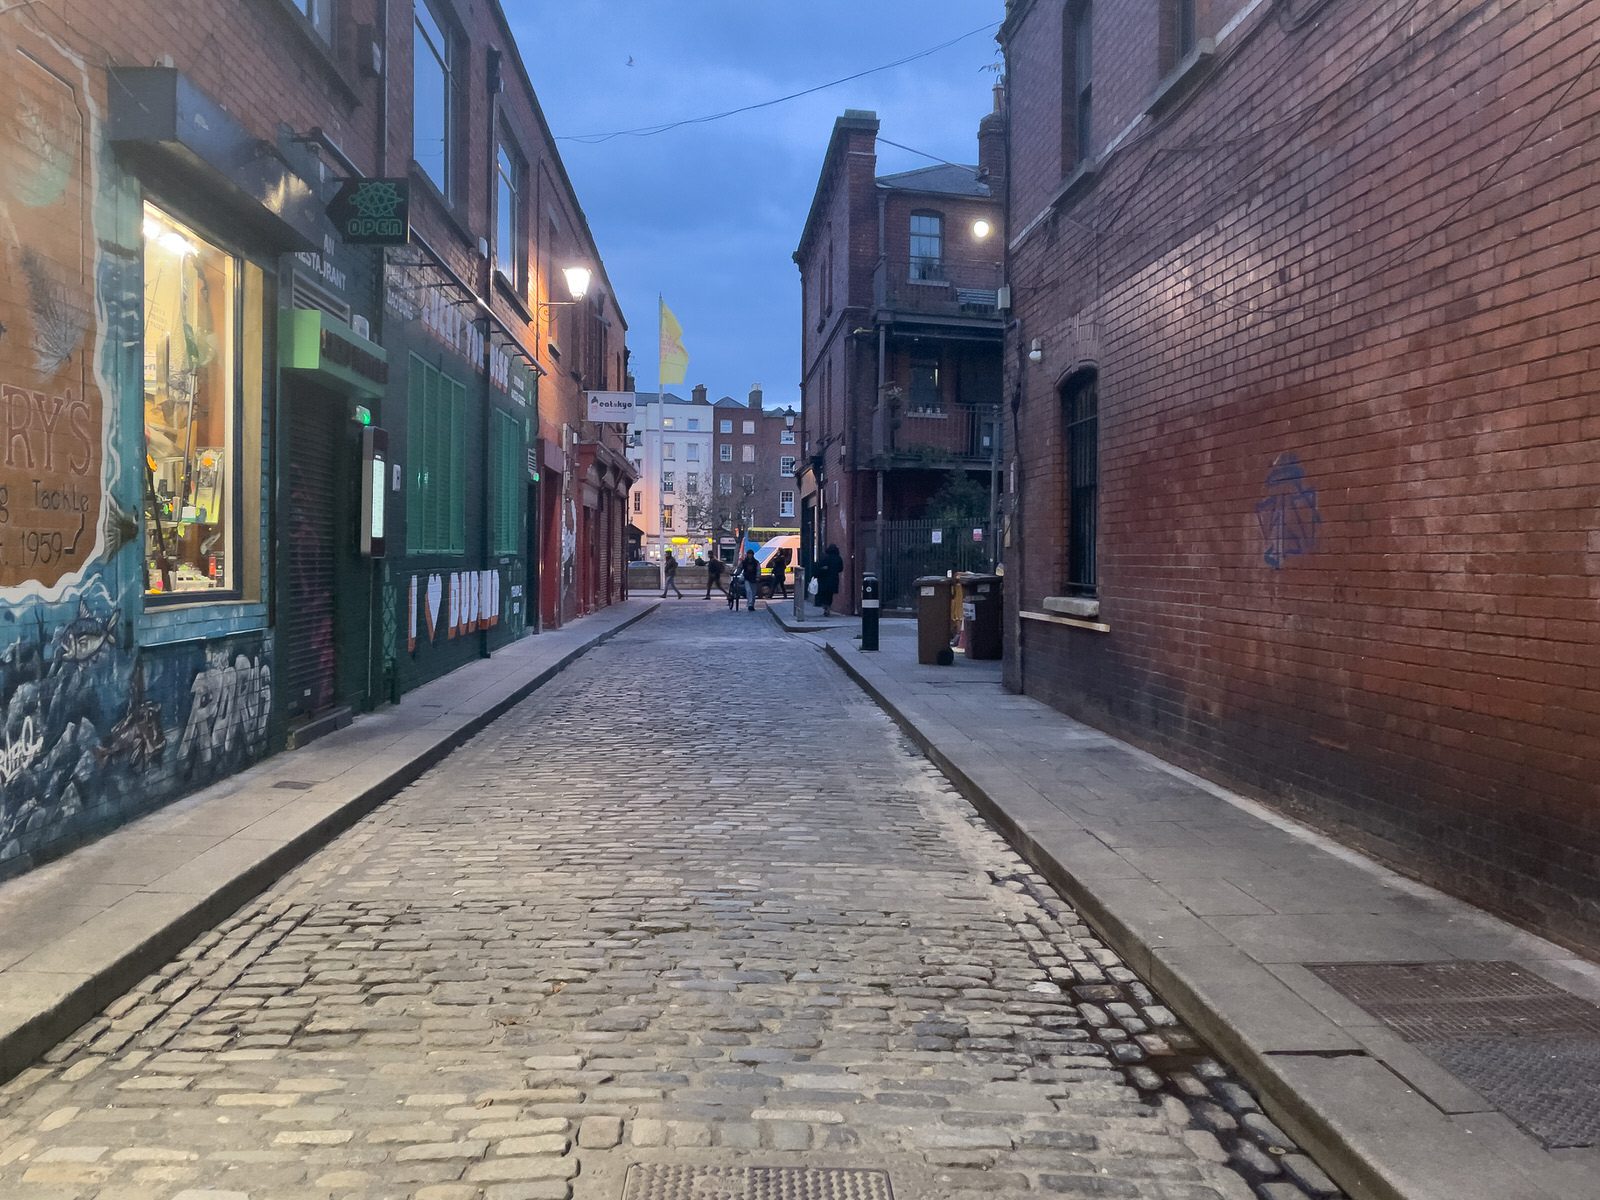 I VISITED TEMPLE BAR TODAY [AS NIGHTFALL WAS APPROACHING]-225339-1